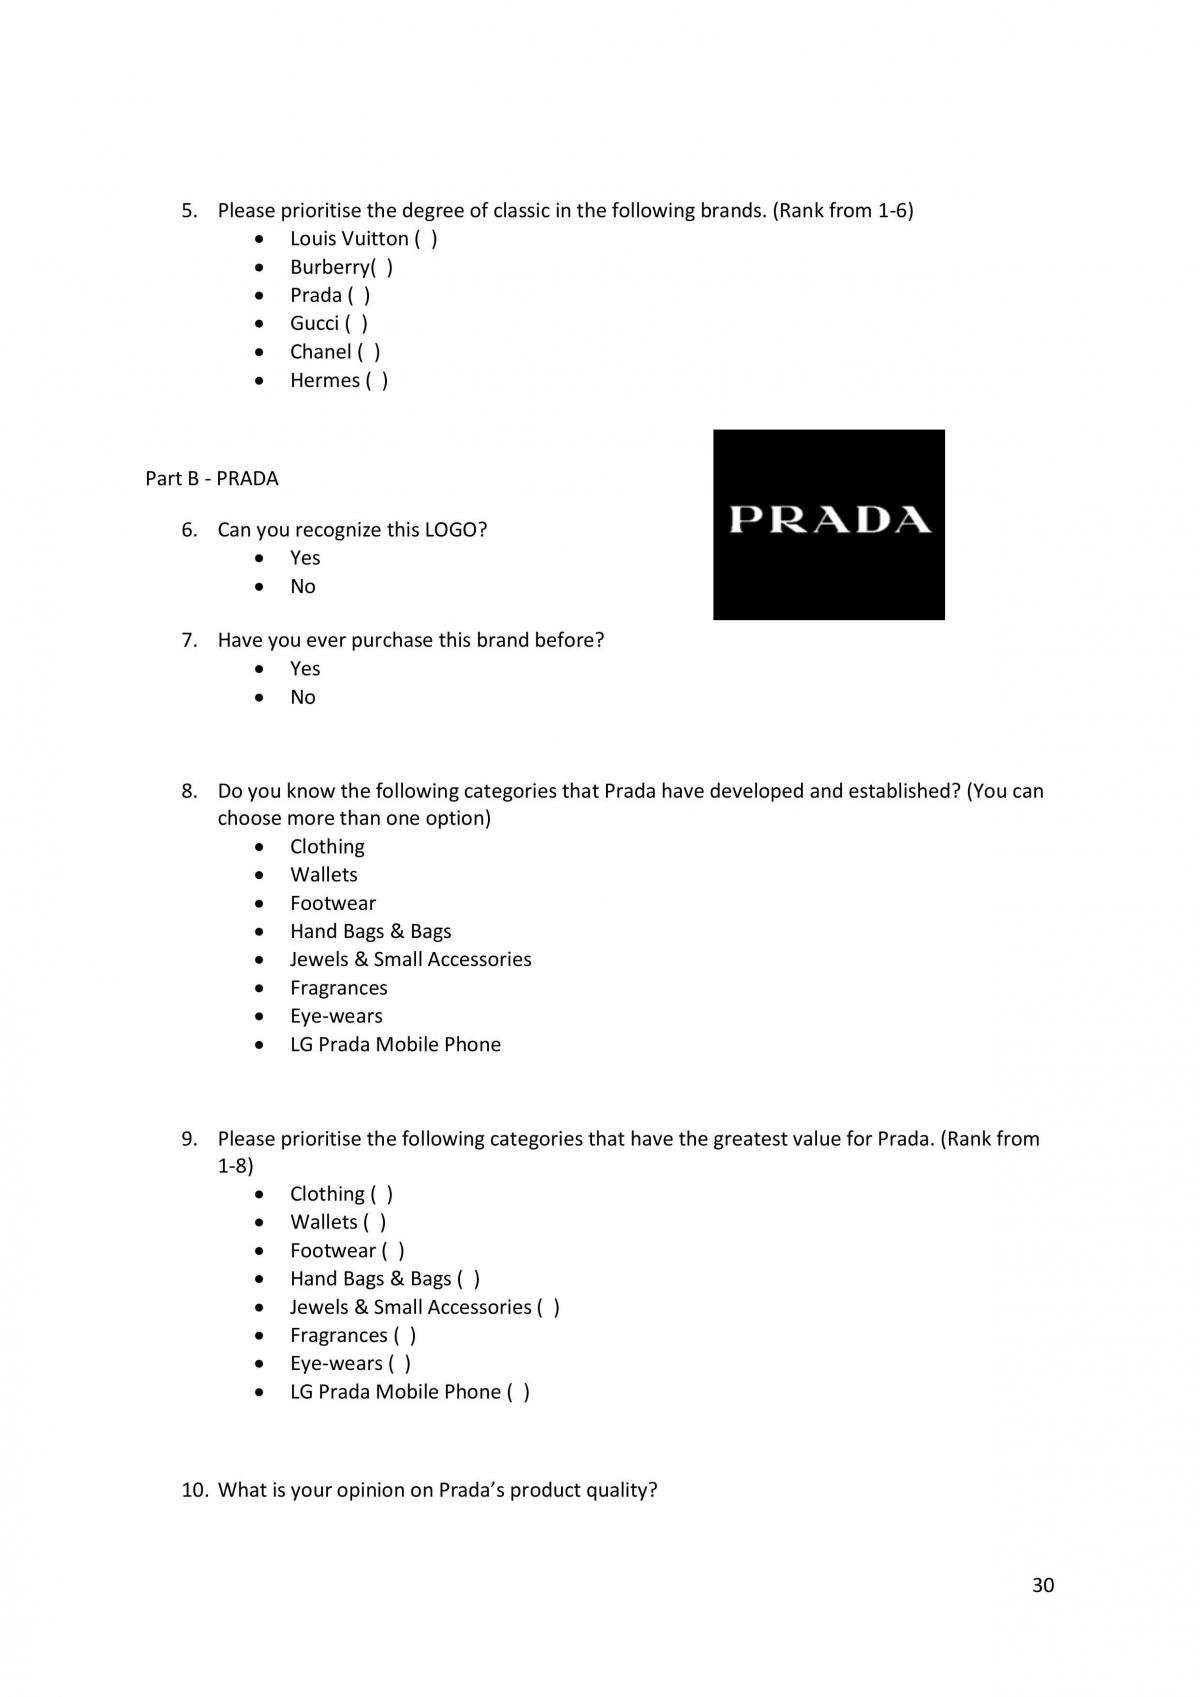 Group Project: Brand Audit and Brand Plan - Page 30